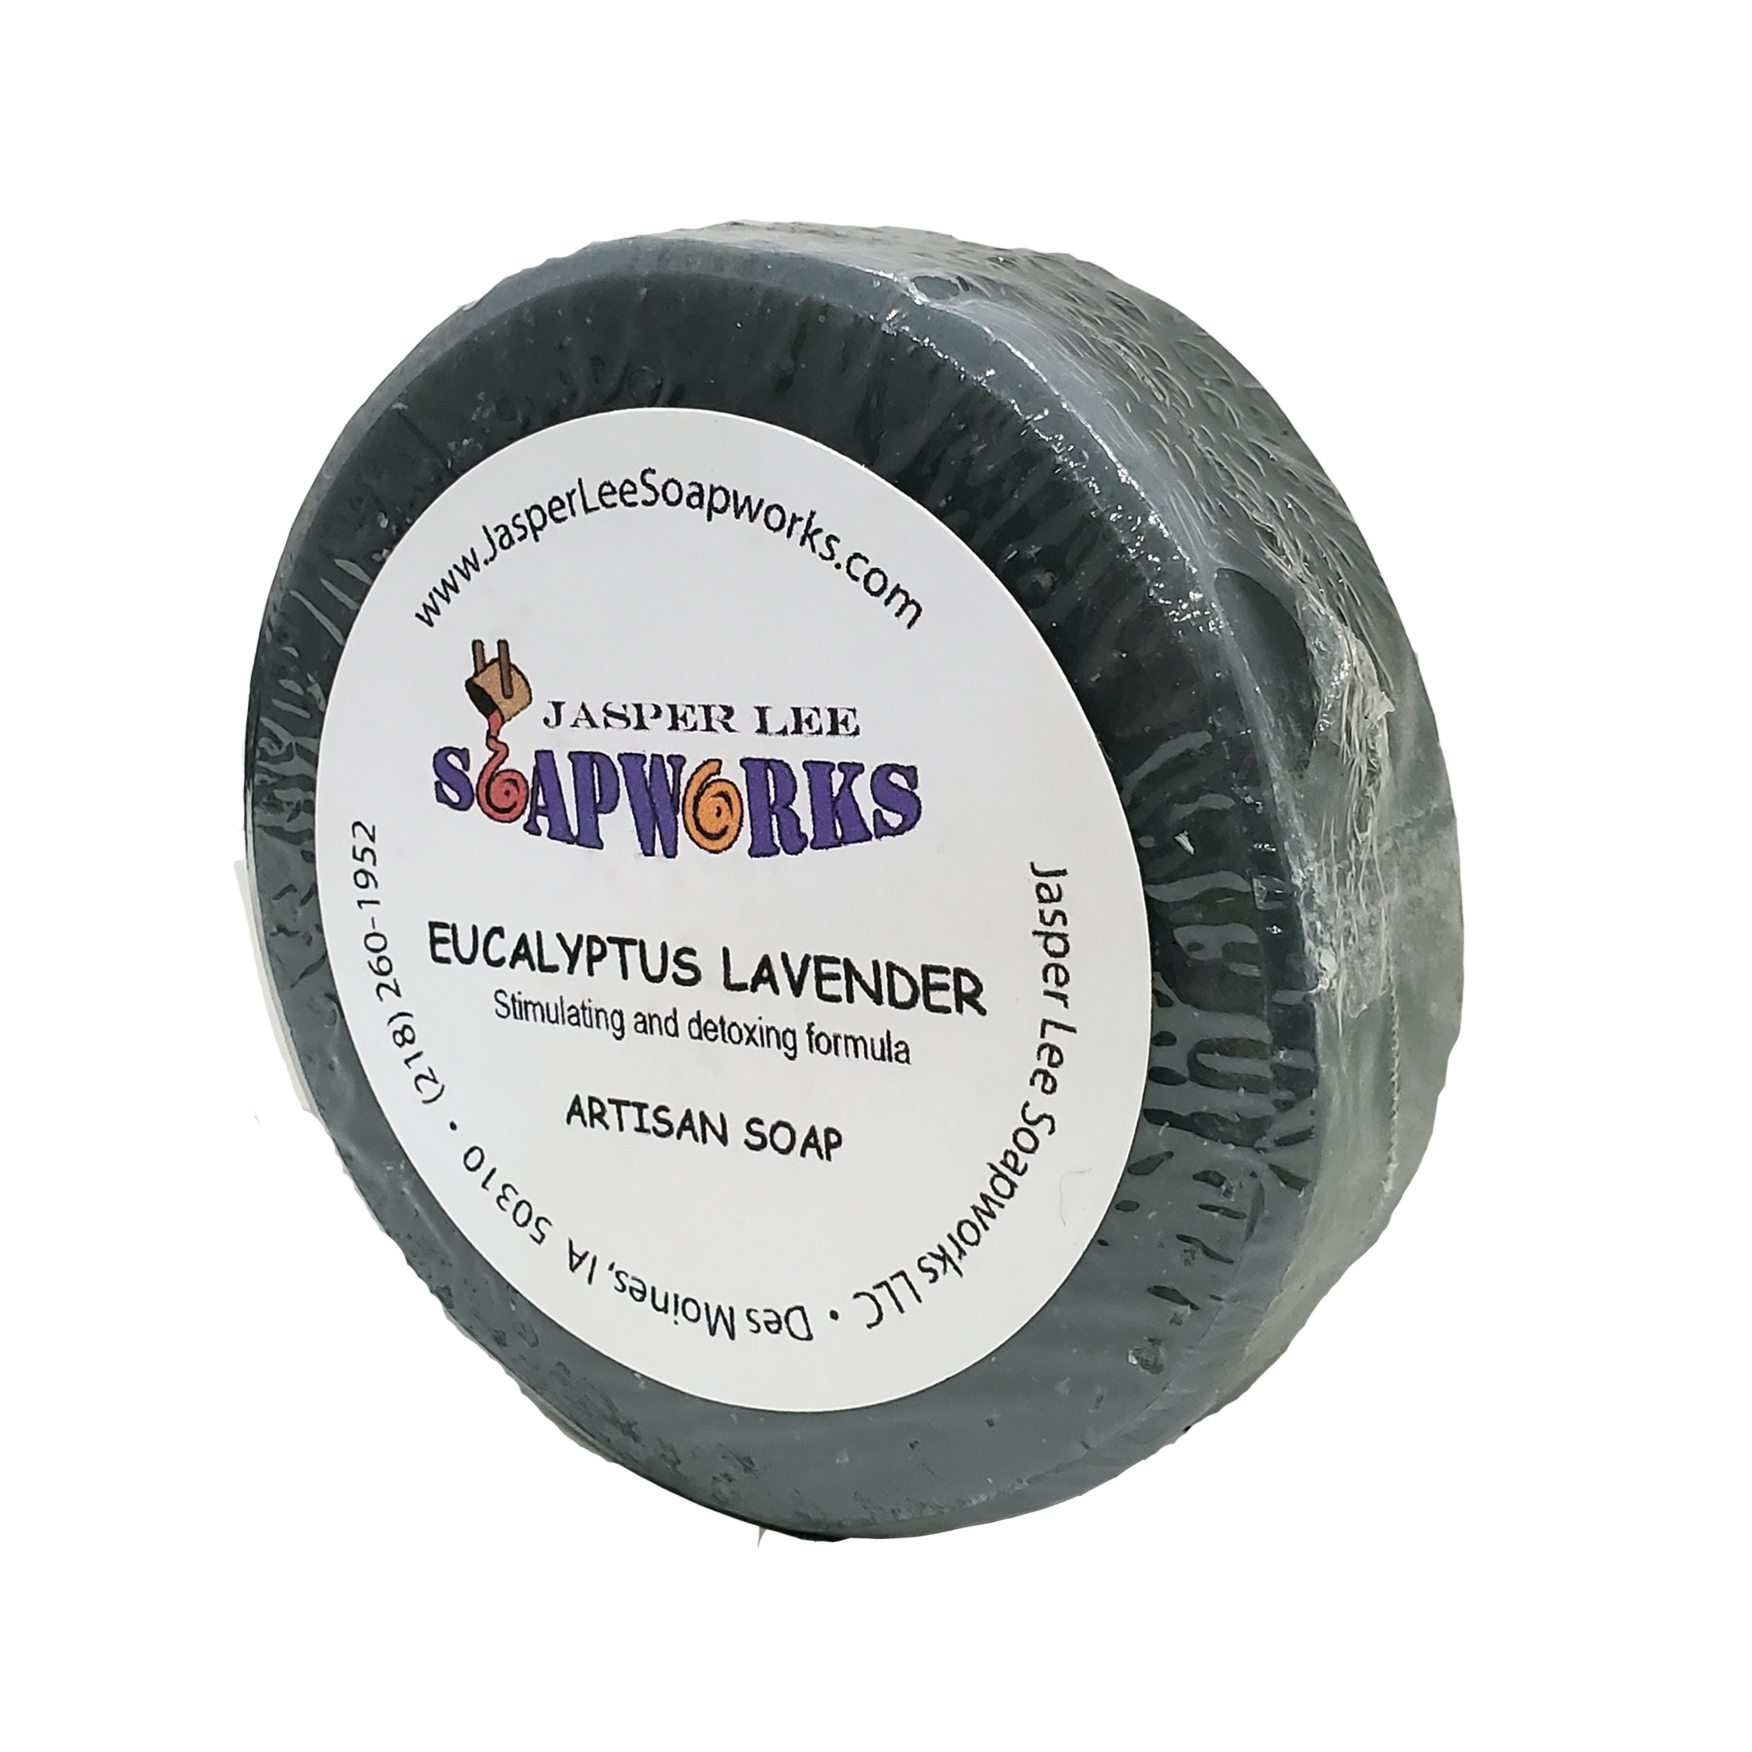 Eucalyptus lavender activated charcoal artisan soap in clear biodegradable packaging